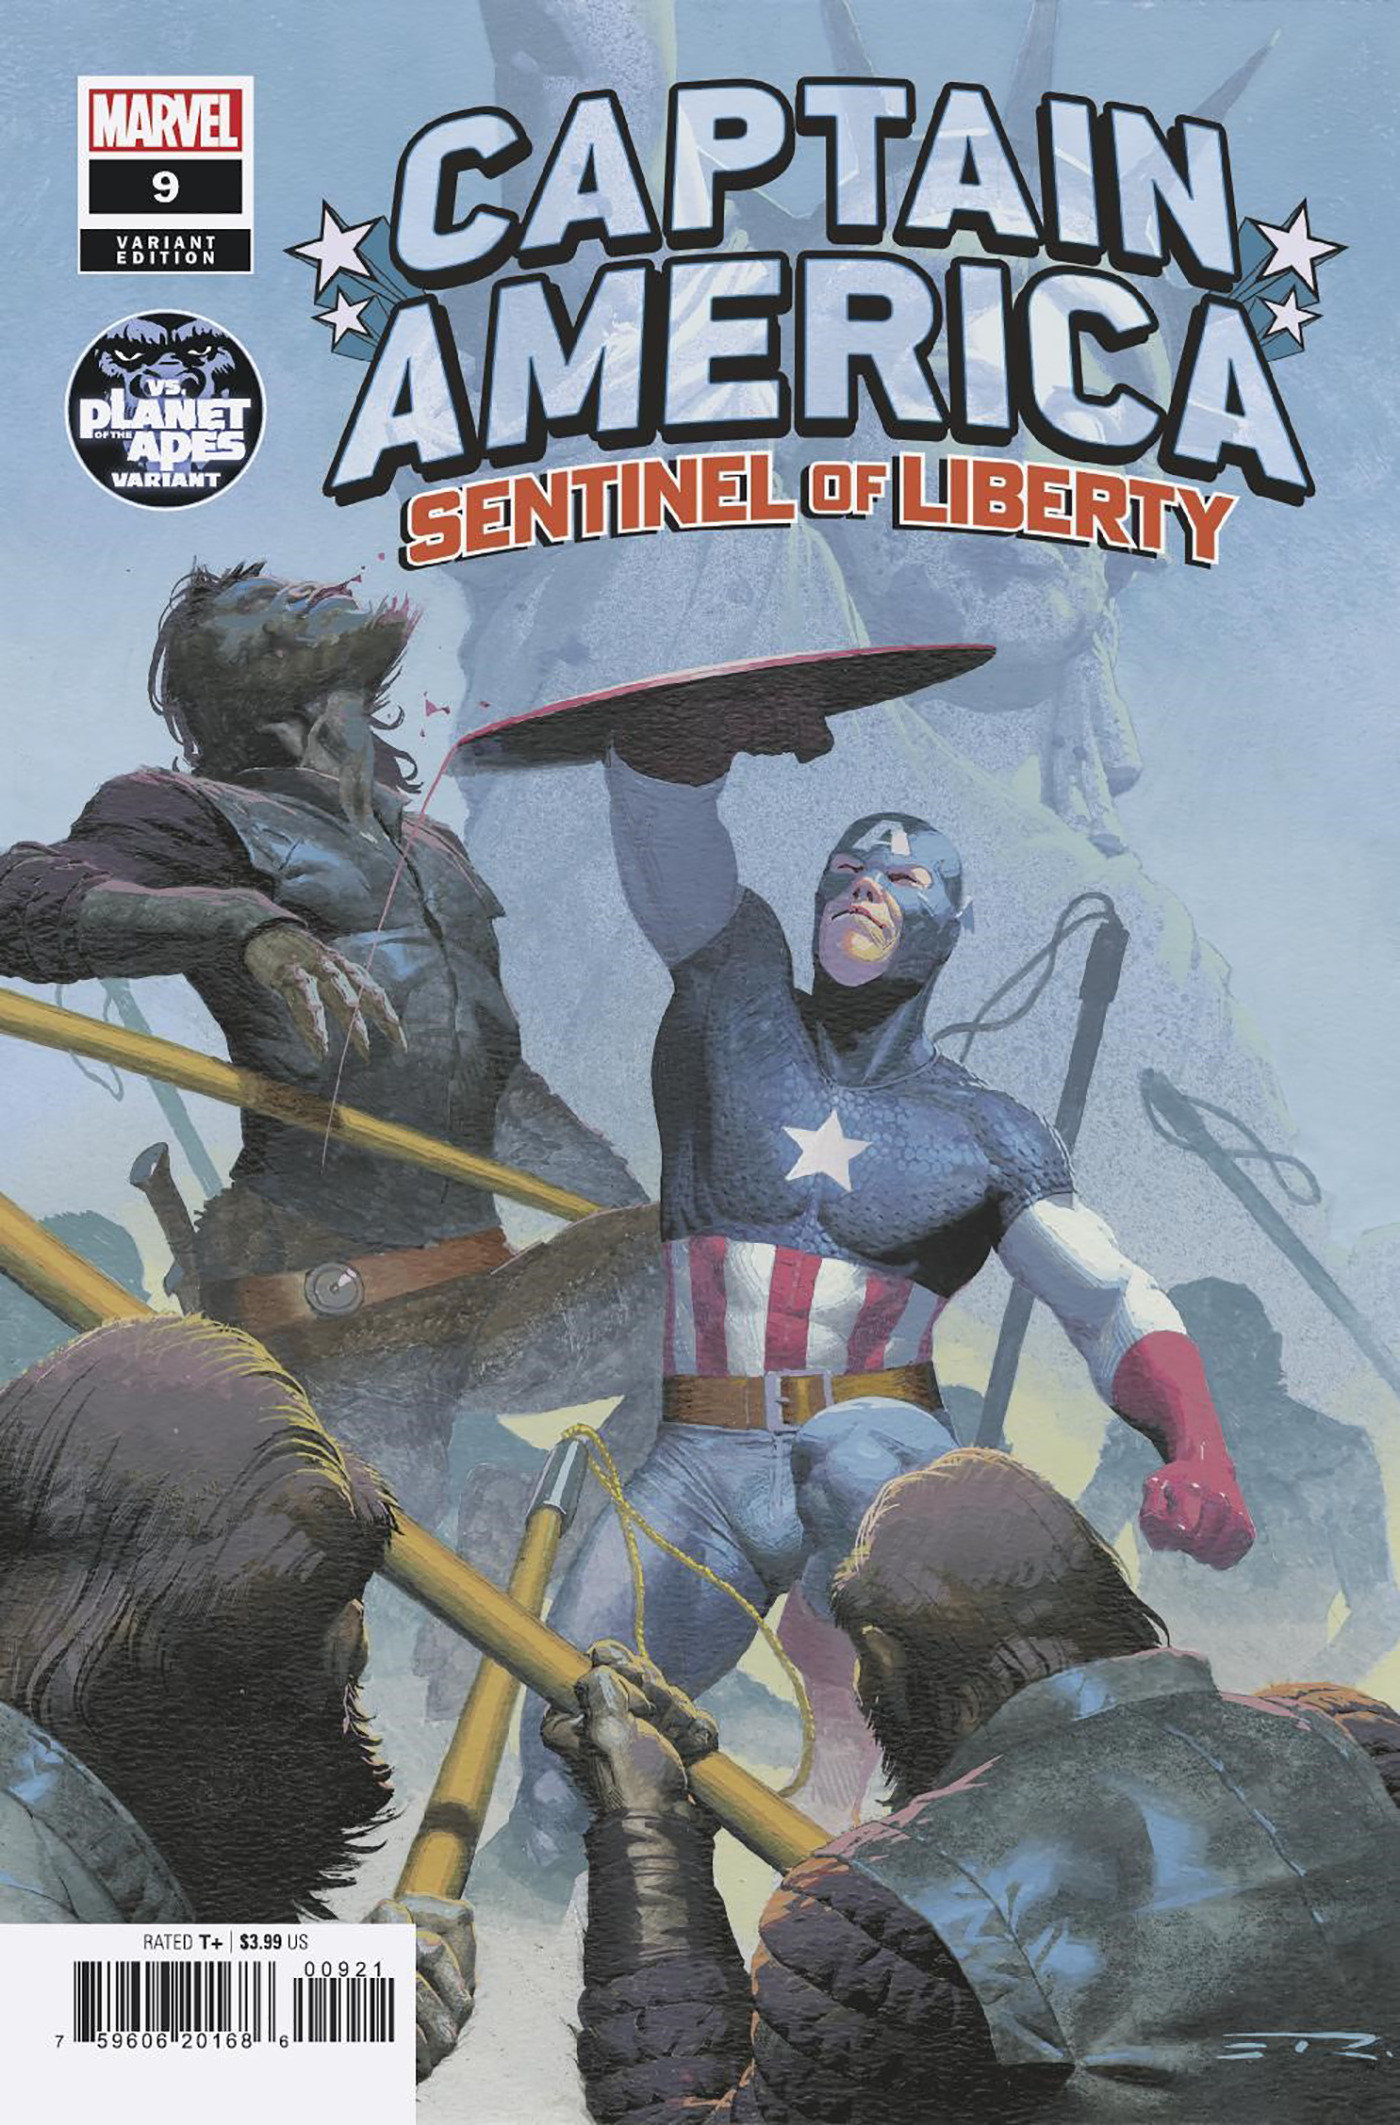 Captain America Sentinel of Liberty #9 Ribic Planet of the Apes Variant